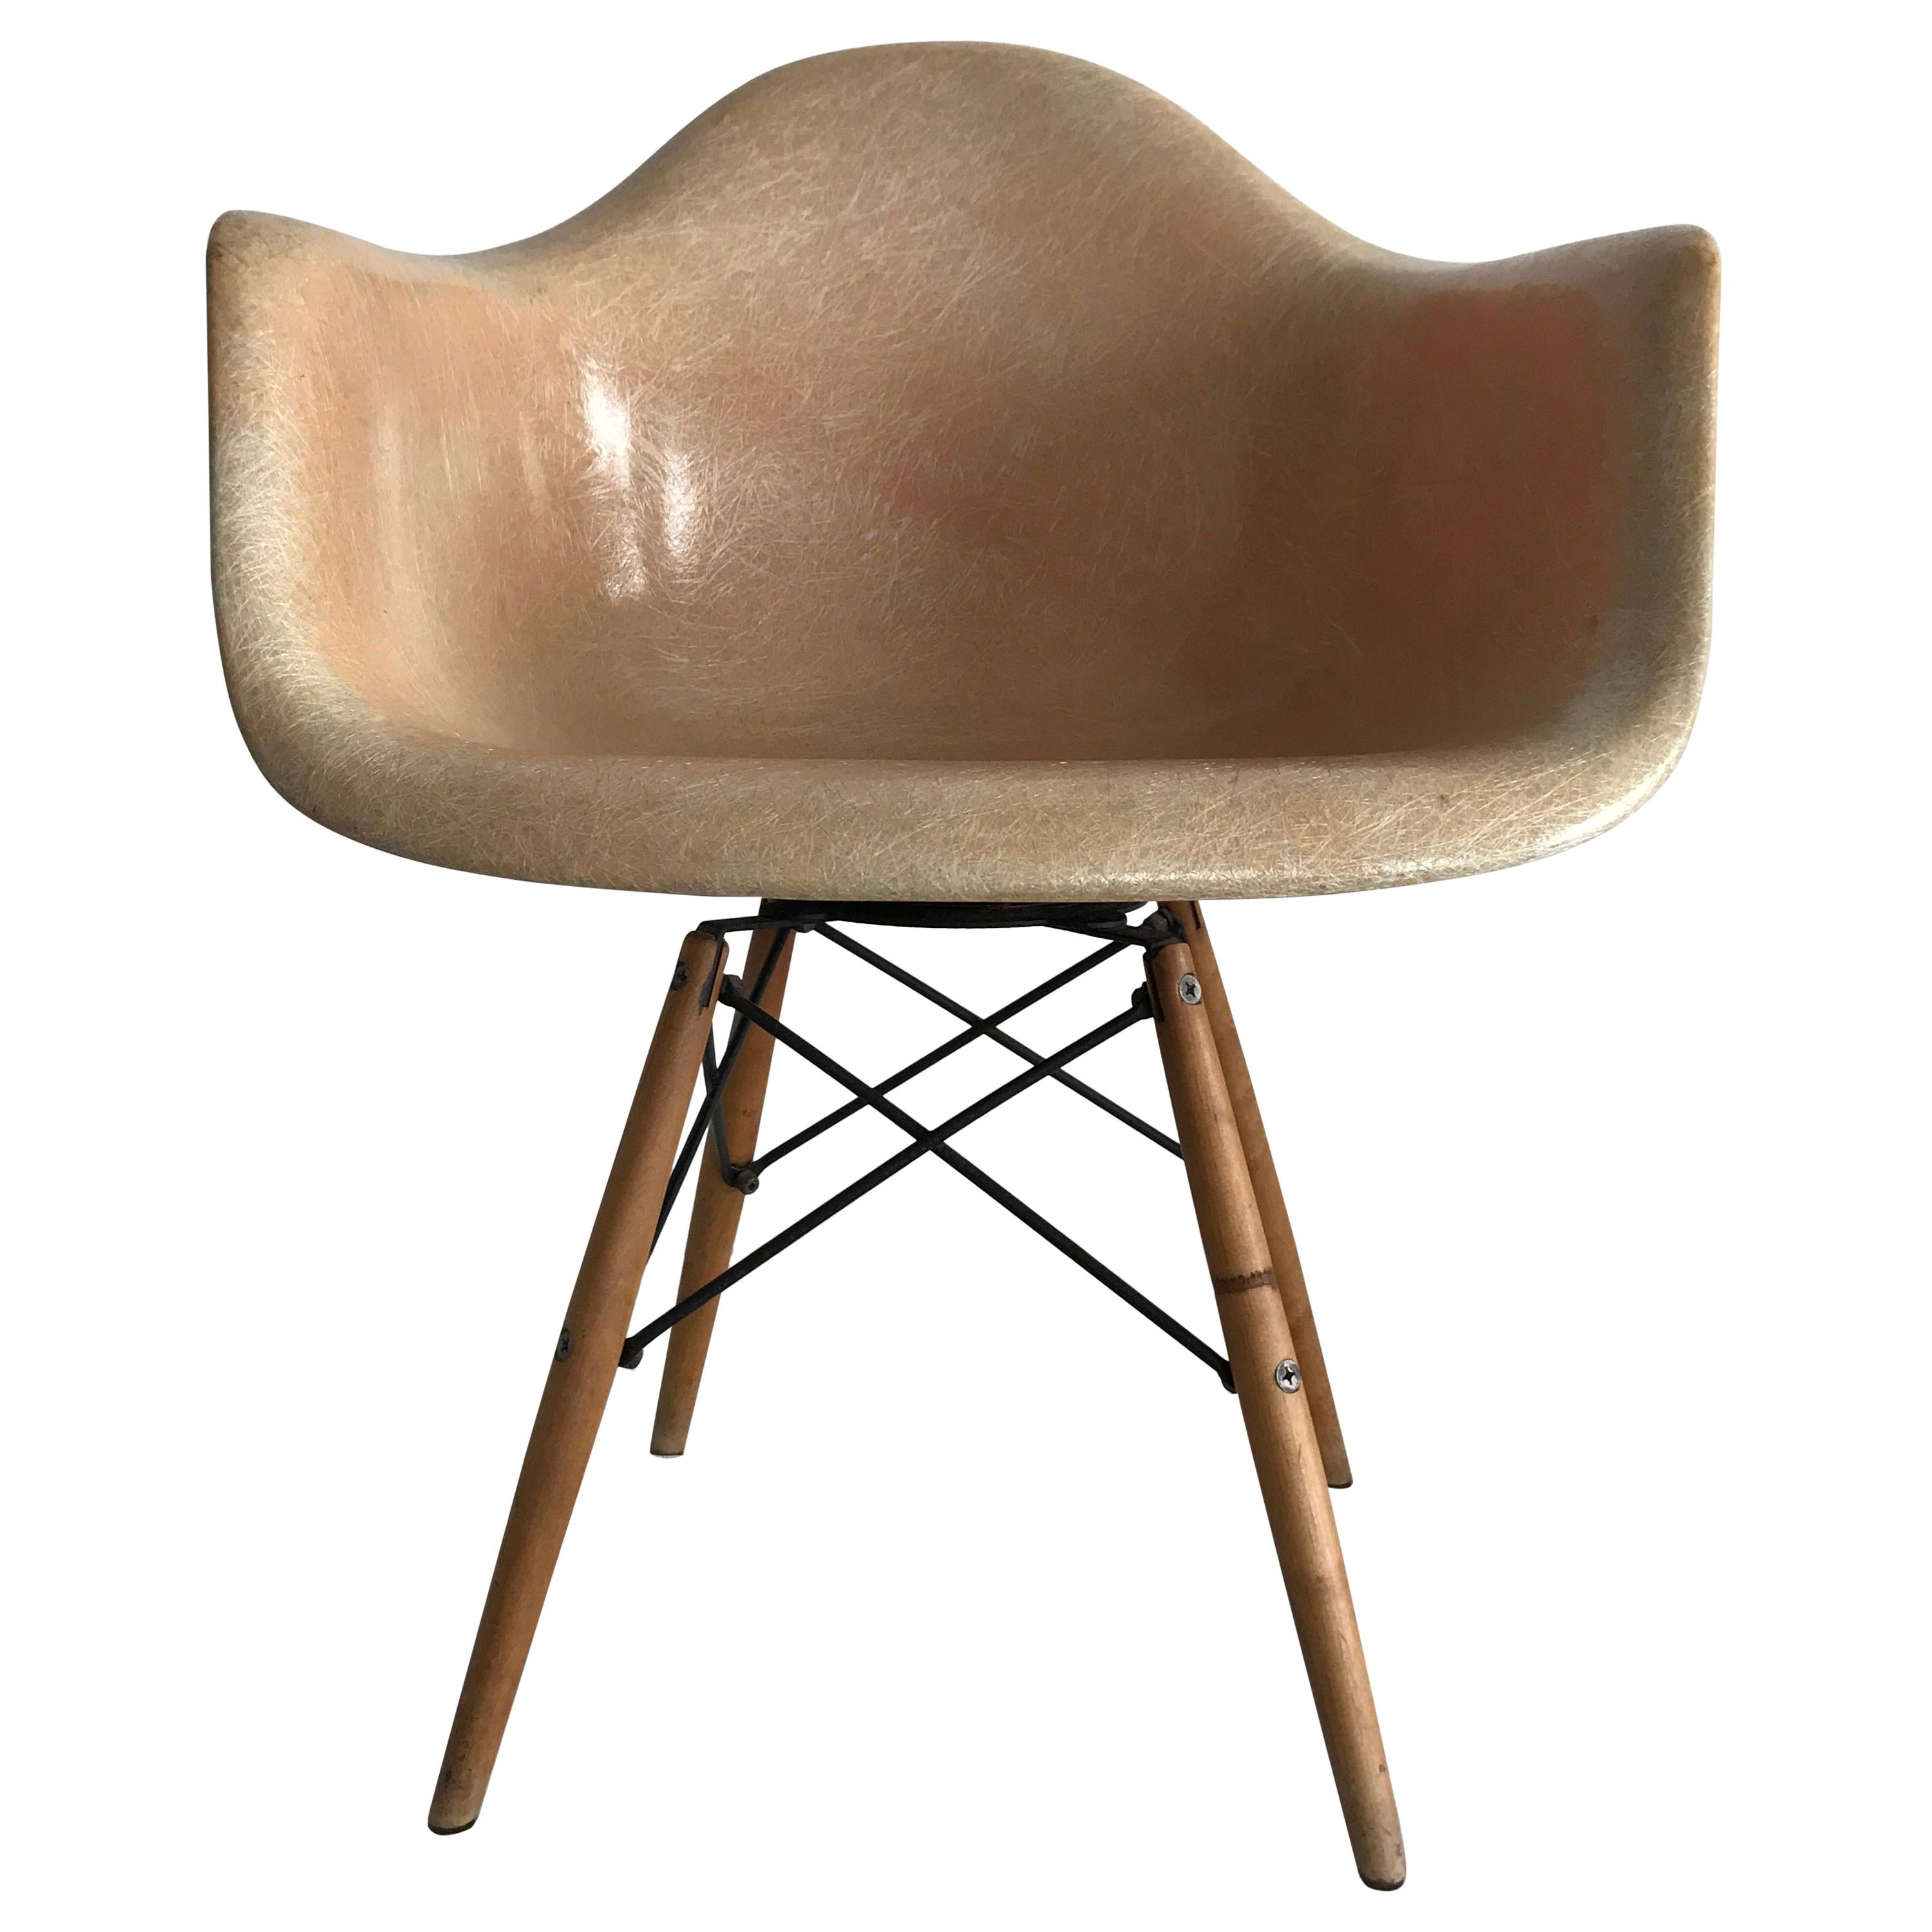 First Edition Charles Eames "Paw Chair" Swivel Fibre Glass Shell Dowel Leg Birch For Sale